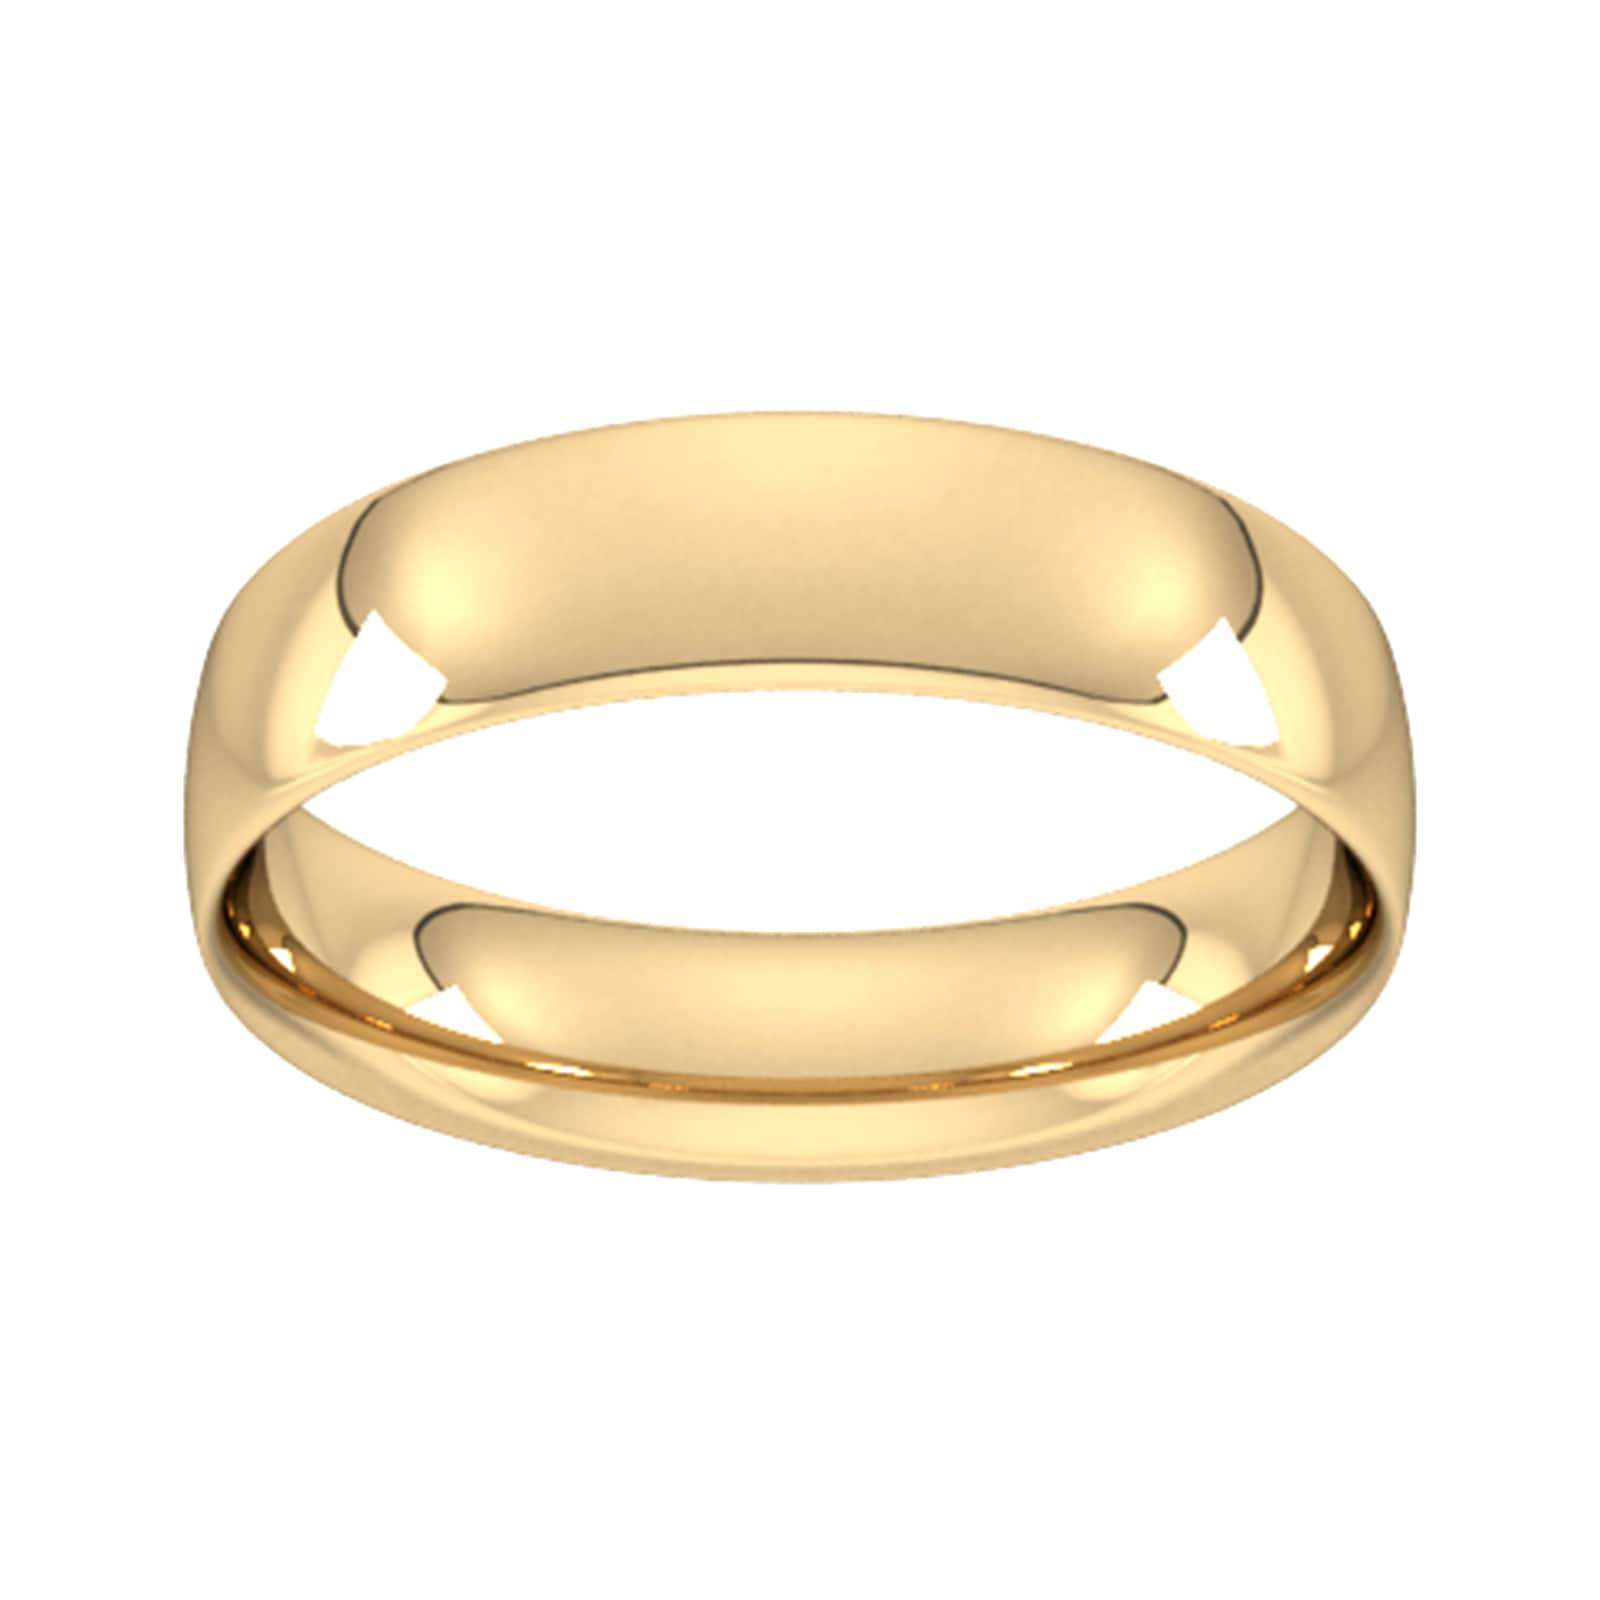 5mm Traditional Court Standard Wedding Ring In 18 Carat Yellow Gold - Ring Size T